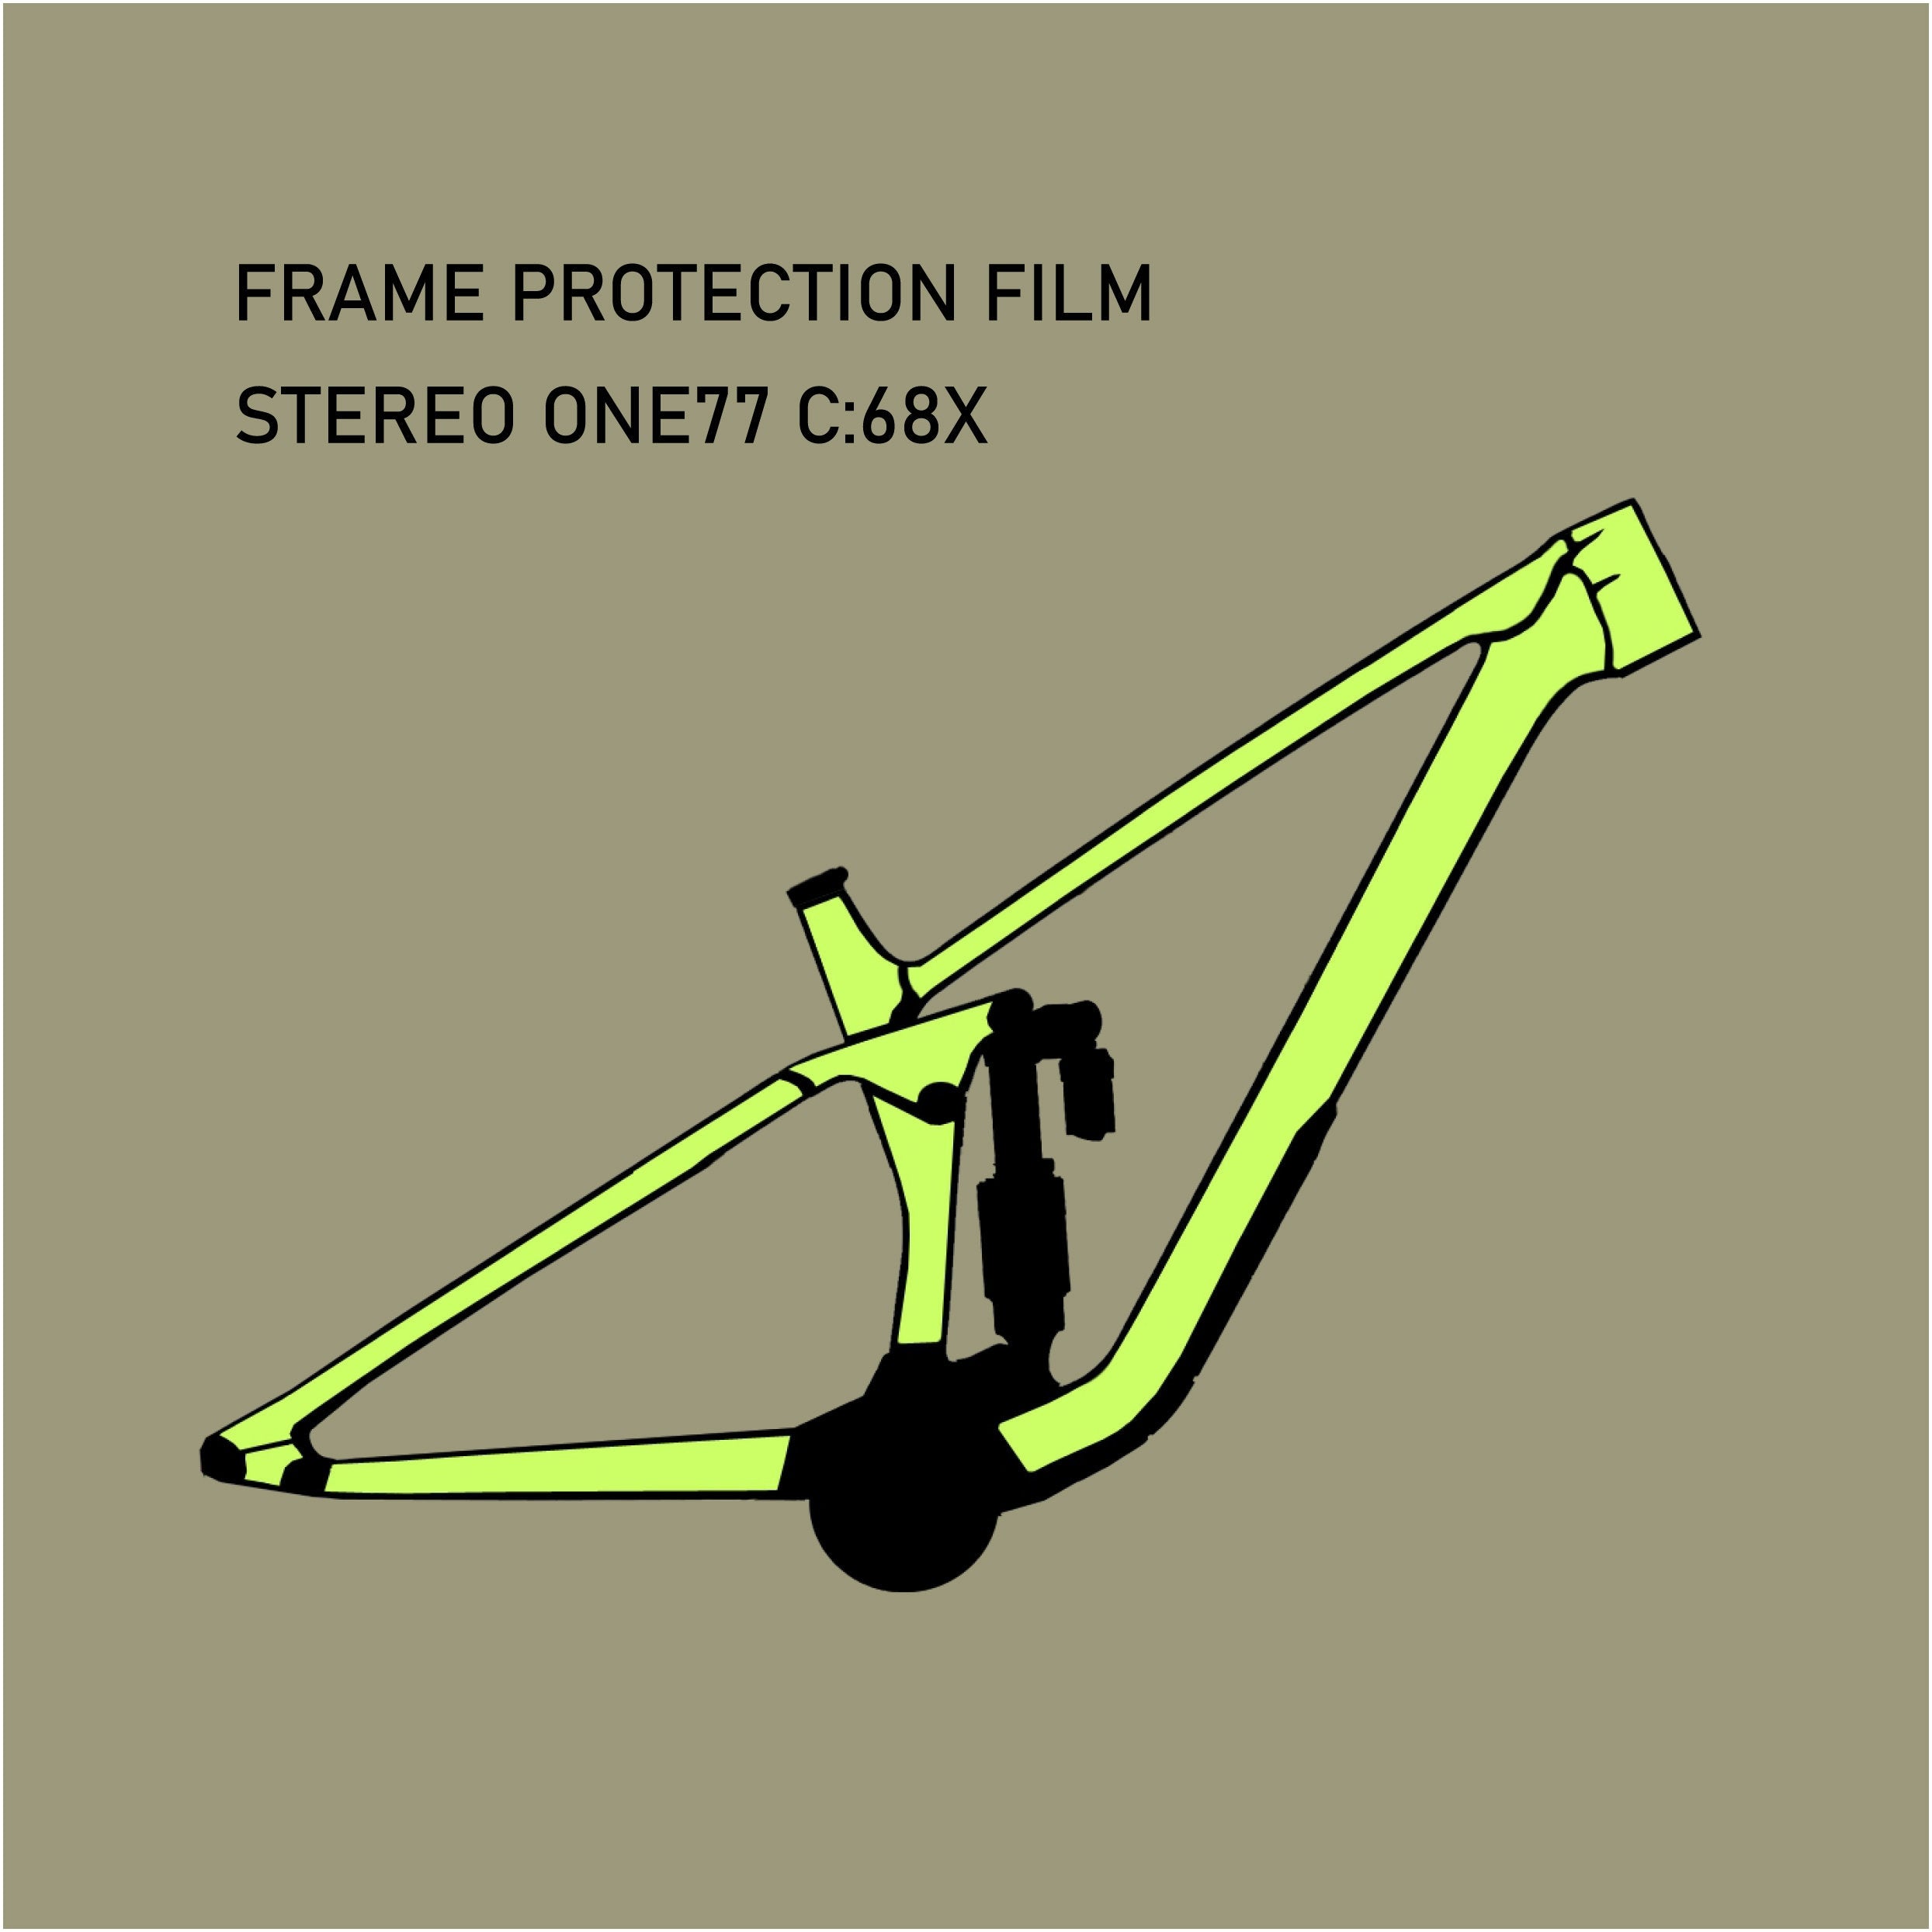 Frame Protection Film for CUBE Stereo ONE77 C:68X